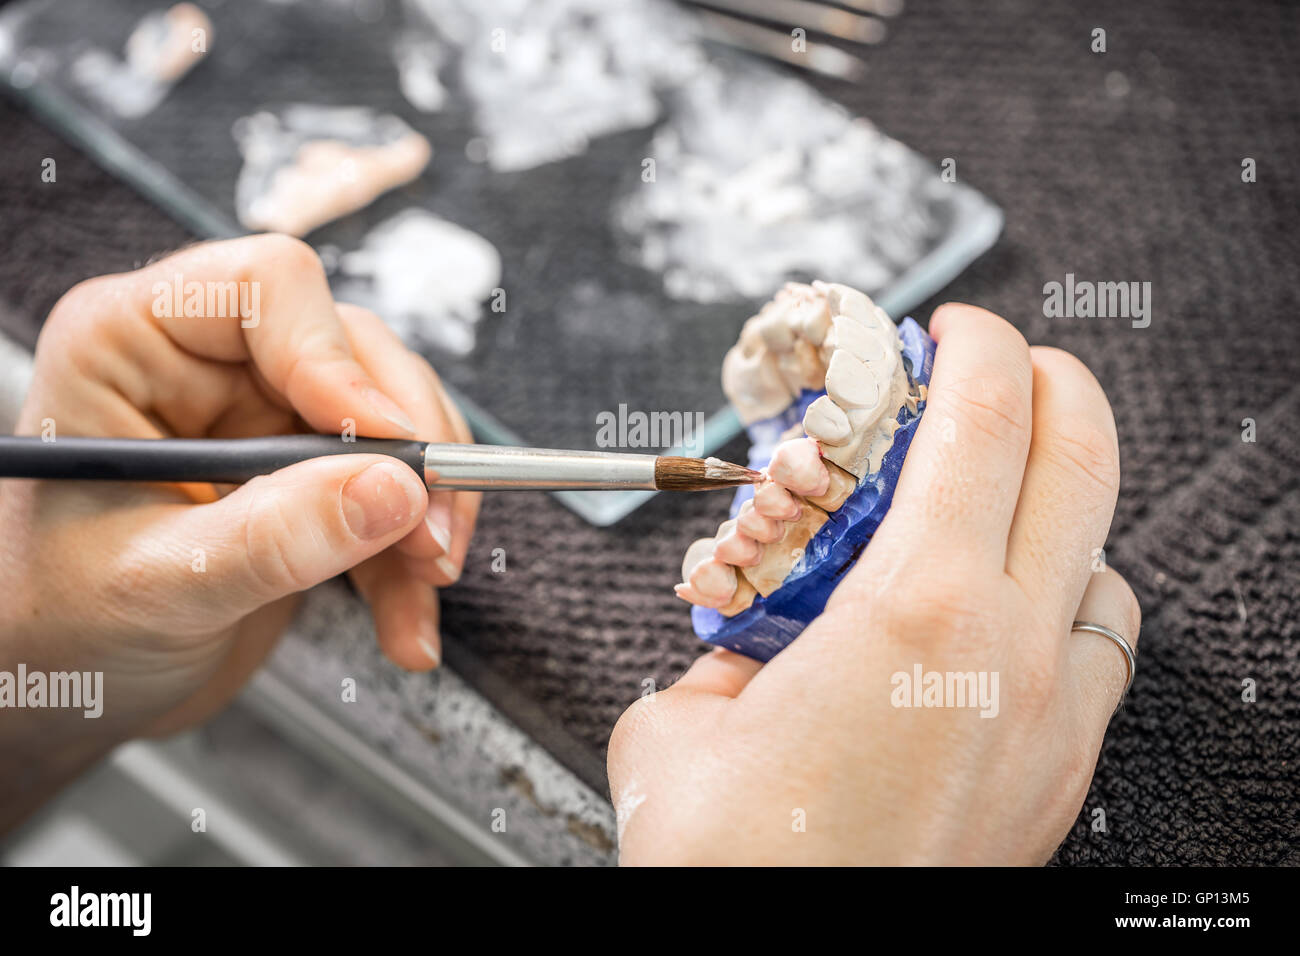 Dental technician working with tooth dentures at prosthesis laboratory Stock Photo